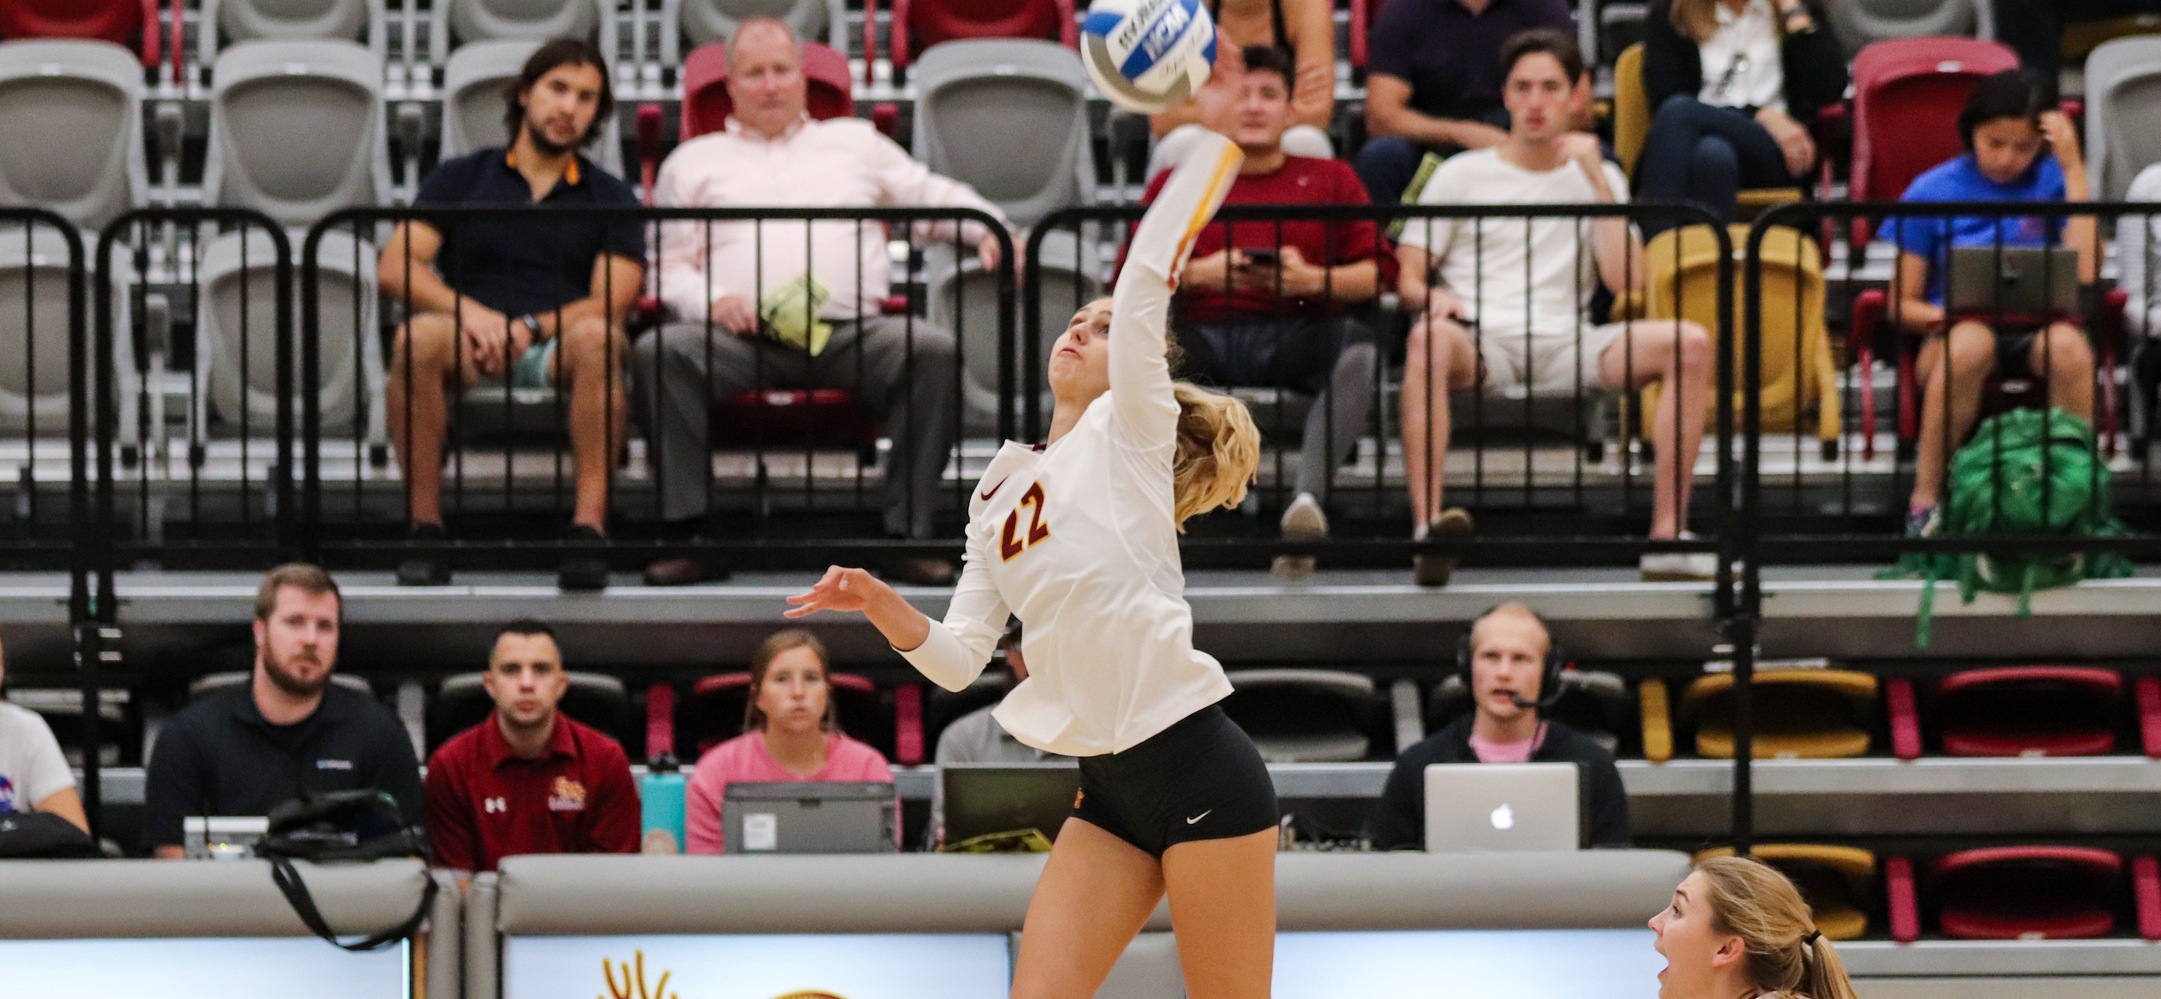 Summer Ellis had 10 kills in 16 attempts (.625) for CMS (photo by Daniel Addison)